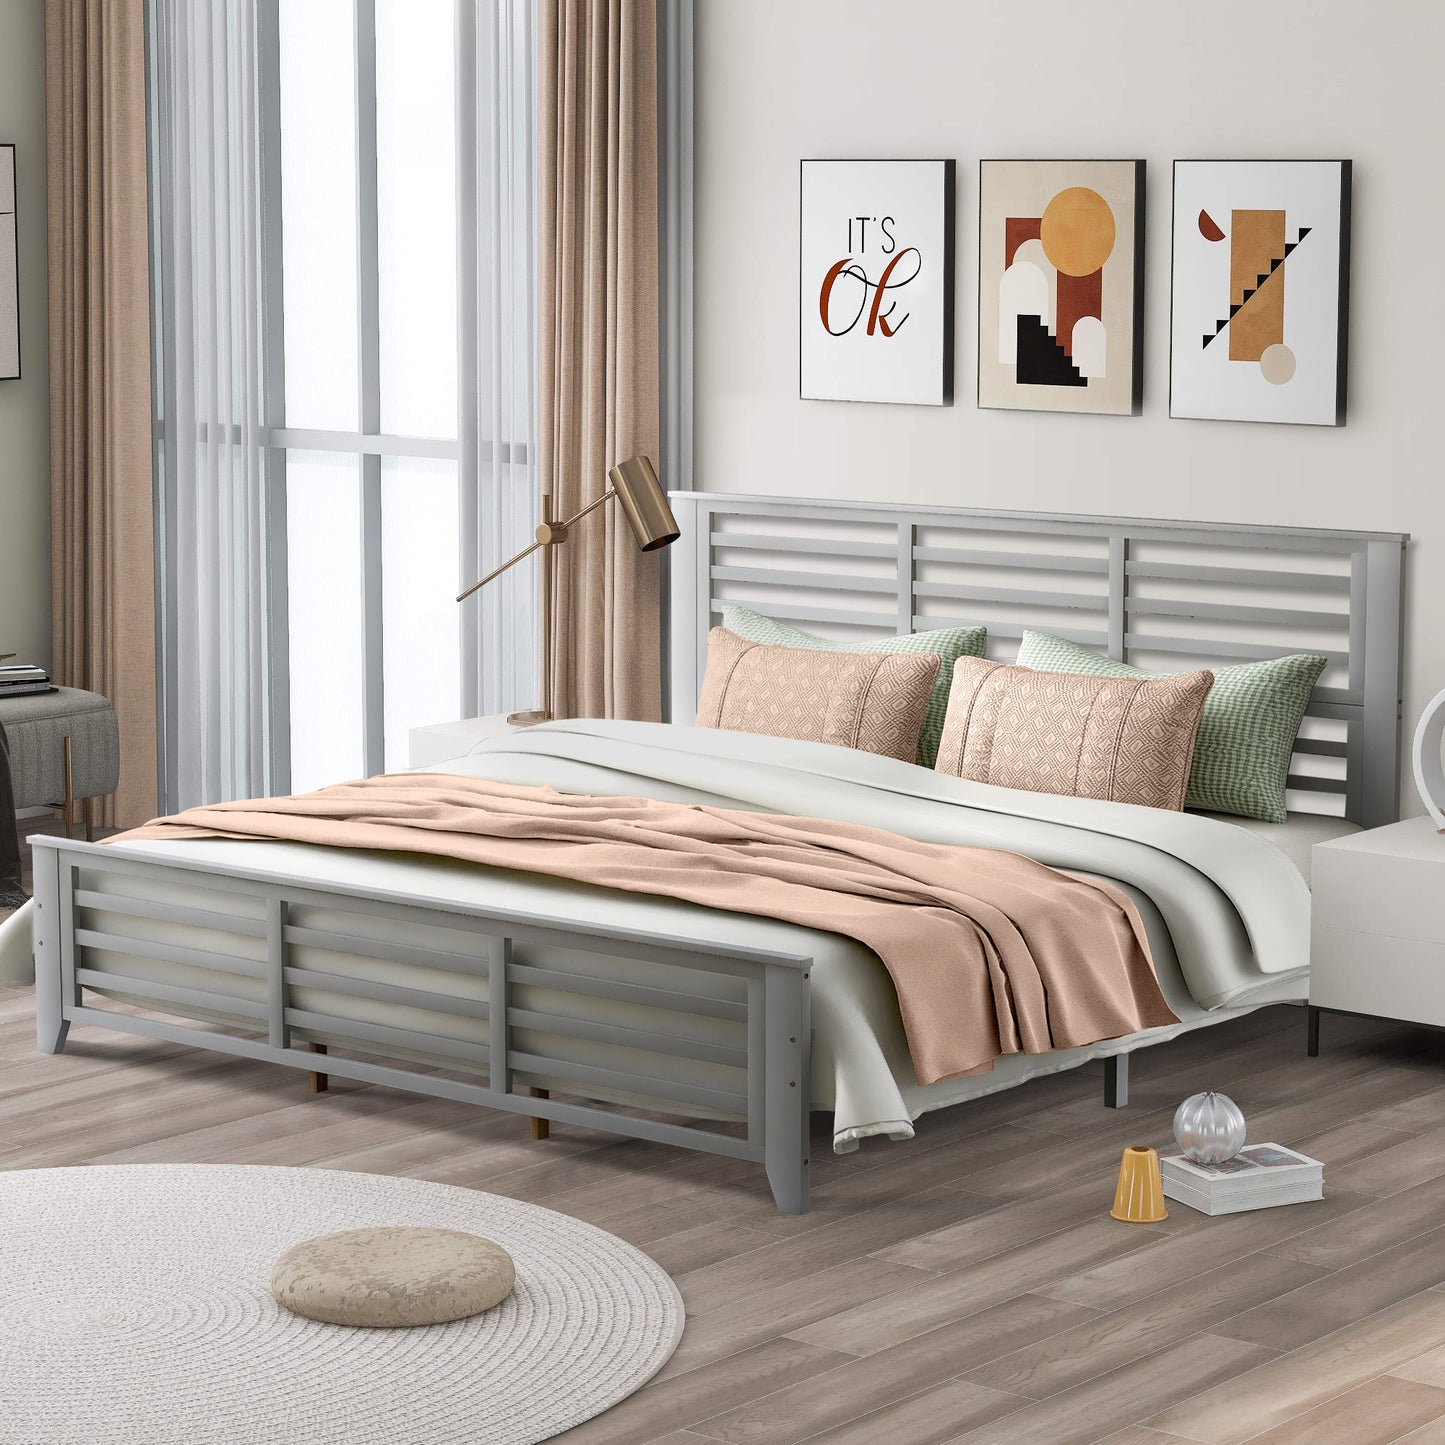 Syngar King Size Platform Bed with Headboard, Solid Wood Frame with Headboard, 500 Lbs. Weight Capacity, White, LJ2093